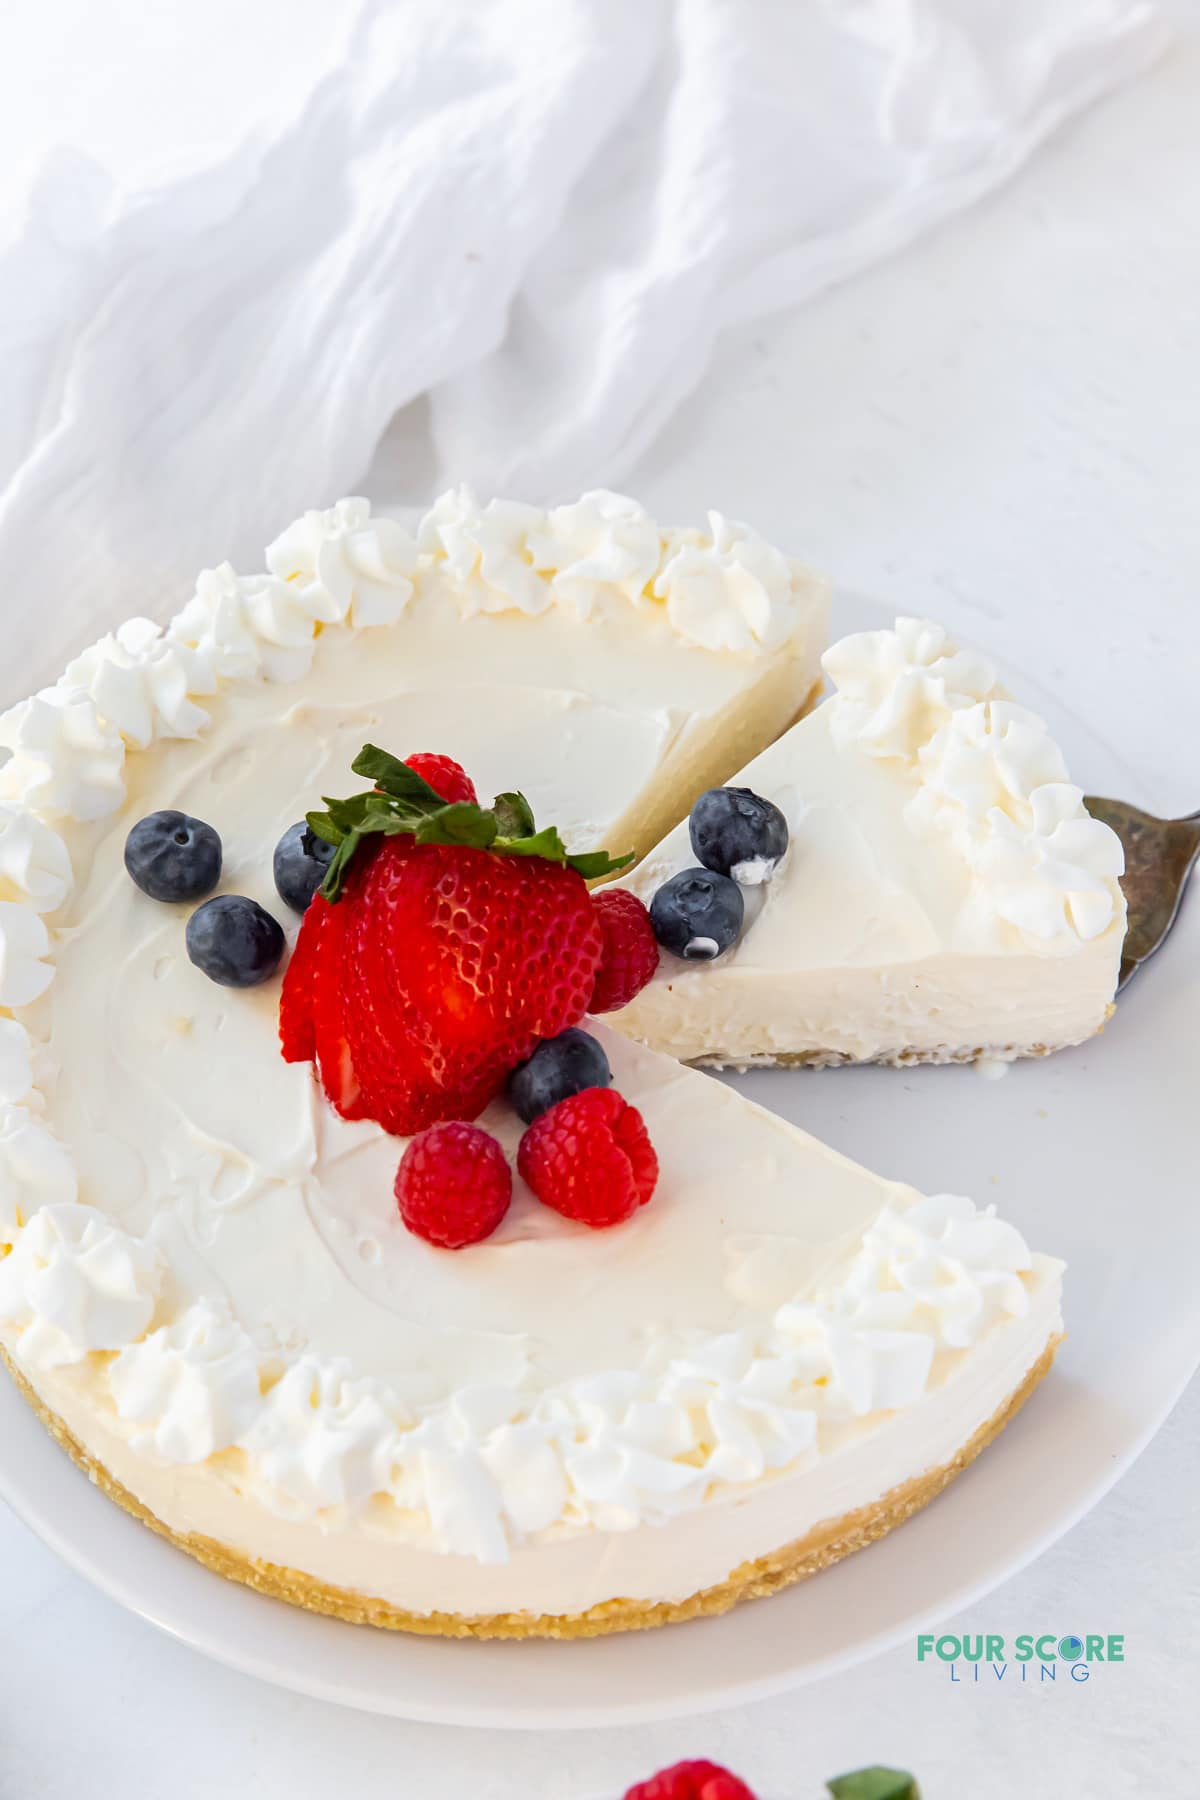 a whole keto no bake cheesecake with whipped cream topping and fresh berries in the center. A piece is gone, and the next piece is being removed with a cake server